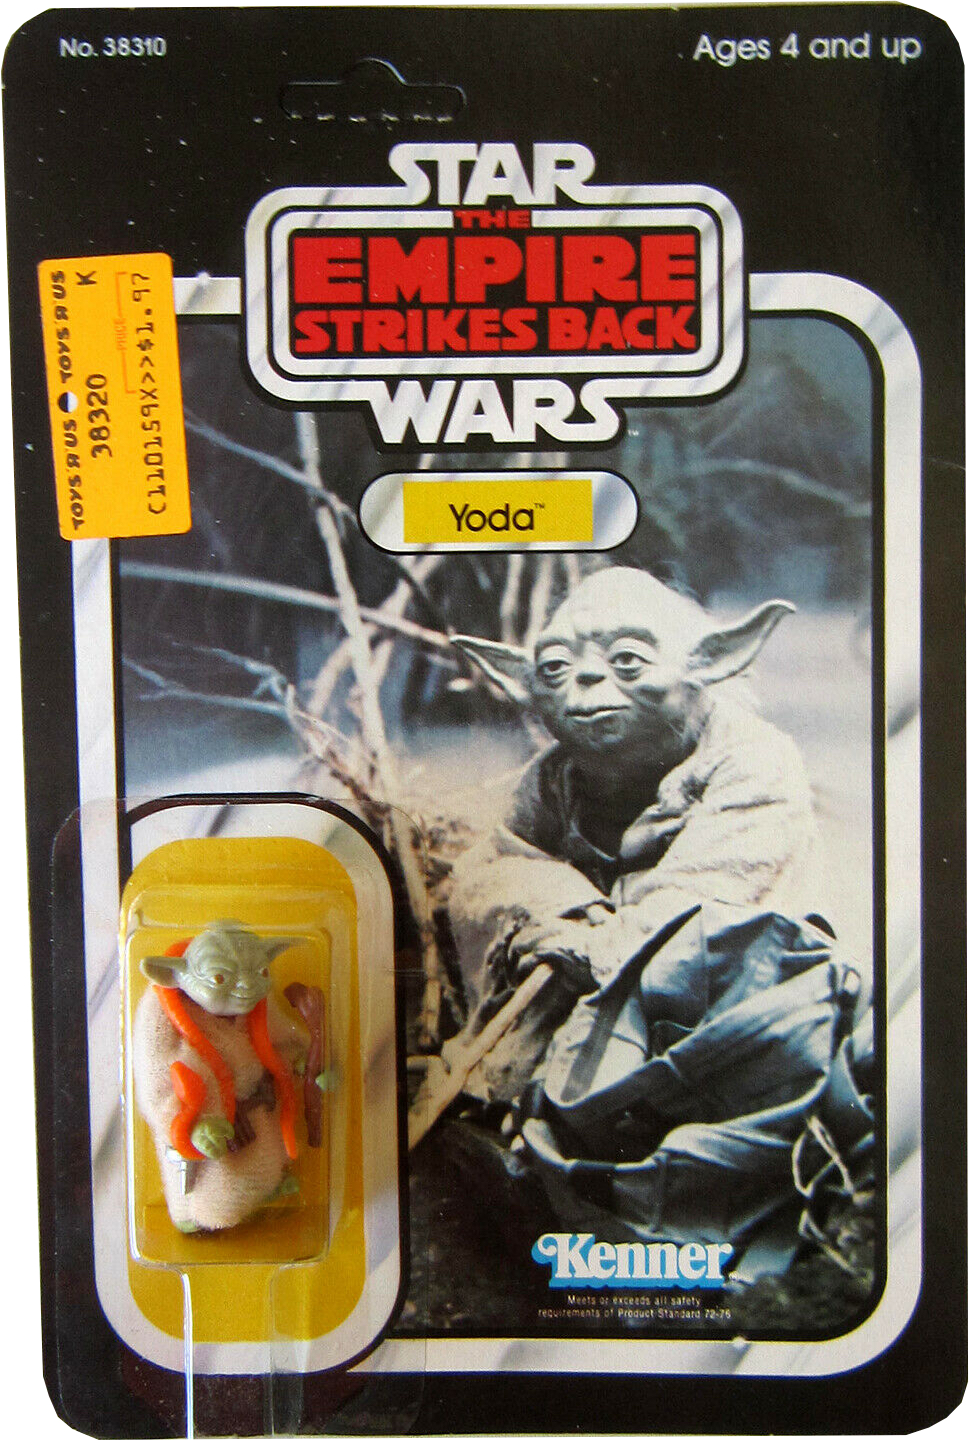 Kenner Star Wars Complete Galaxy Dagobah With Yoda Action Figure for sale online 